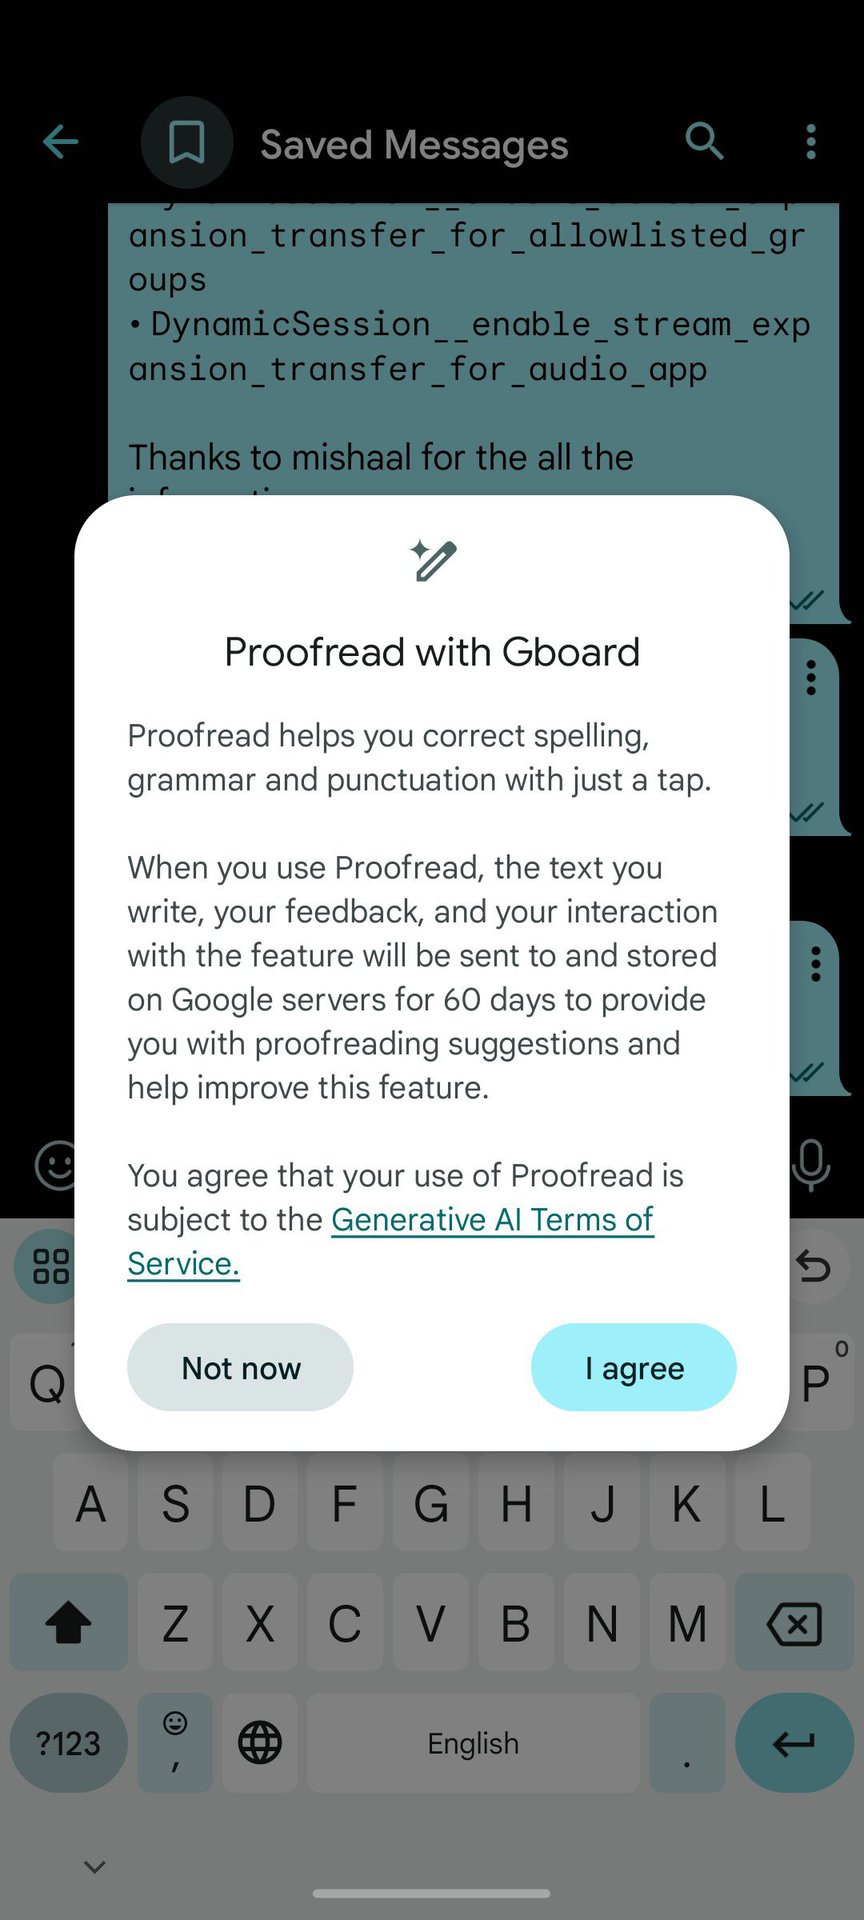 Gboard Proofread with Gboard generative AI 2 2